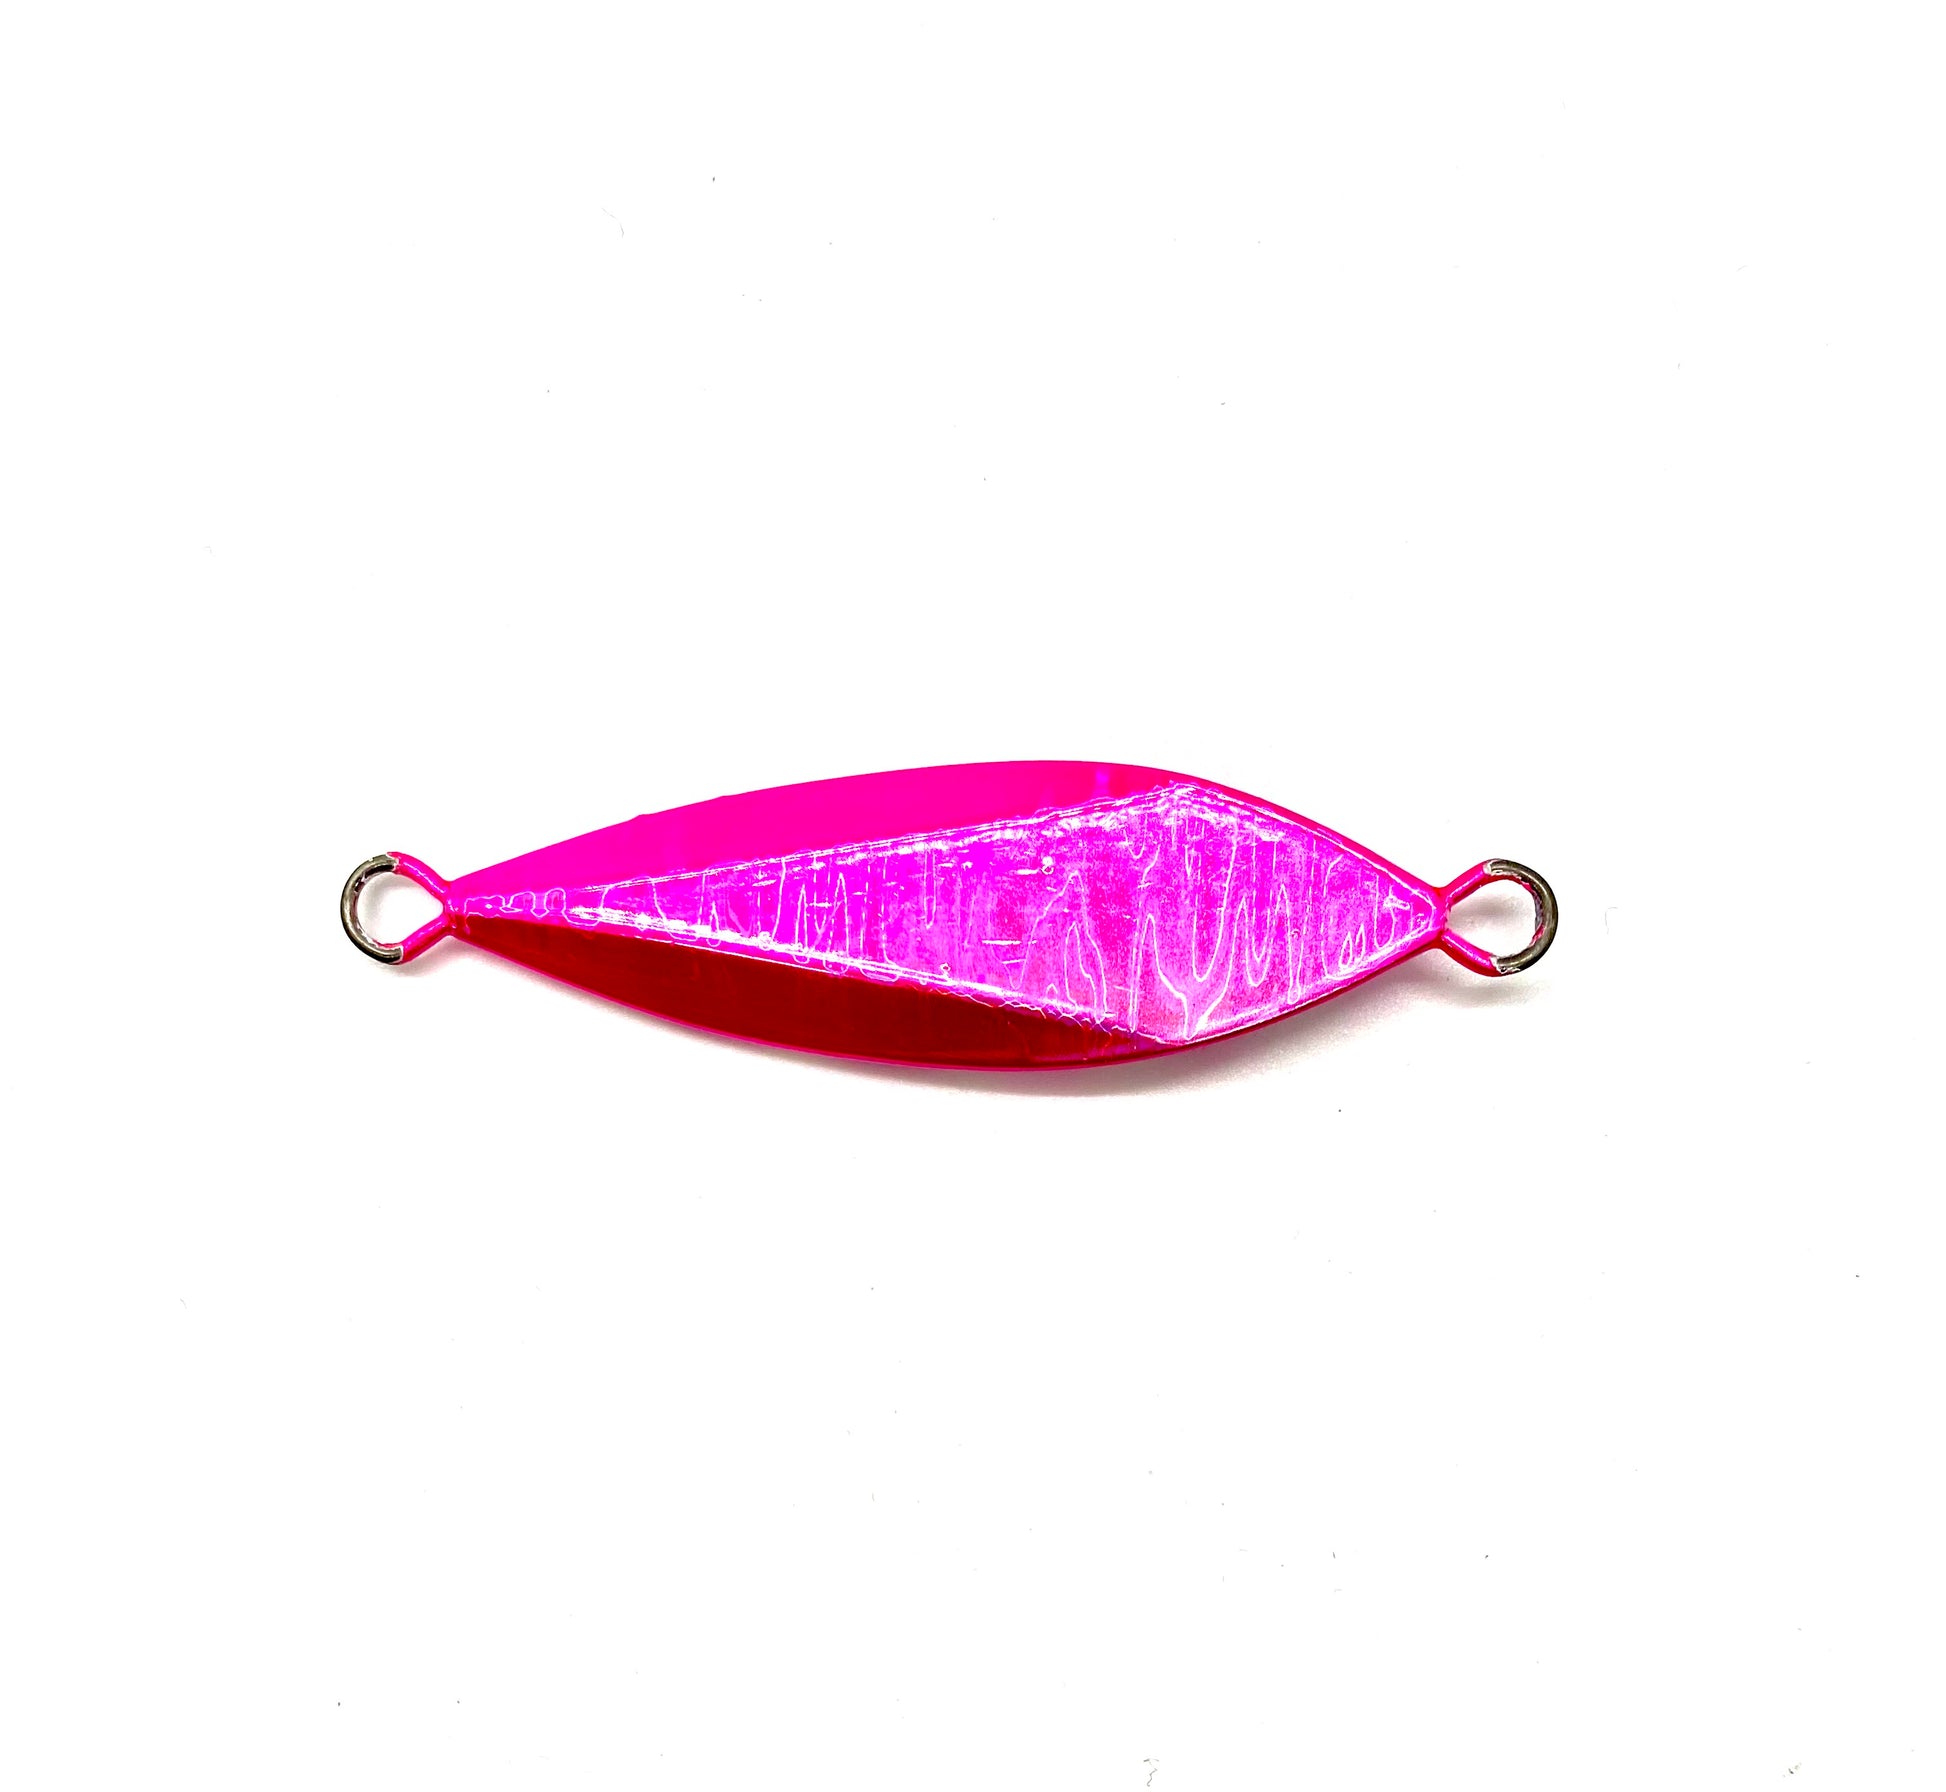 Jig - OniWorks - Mosquito 60g